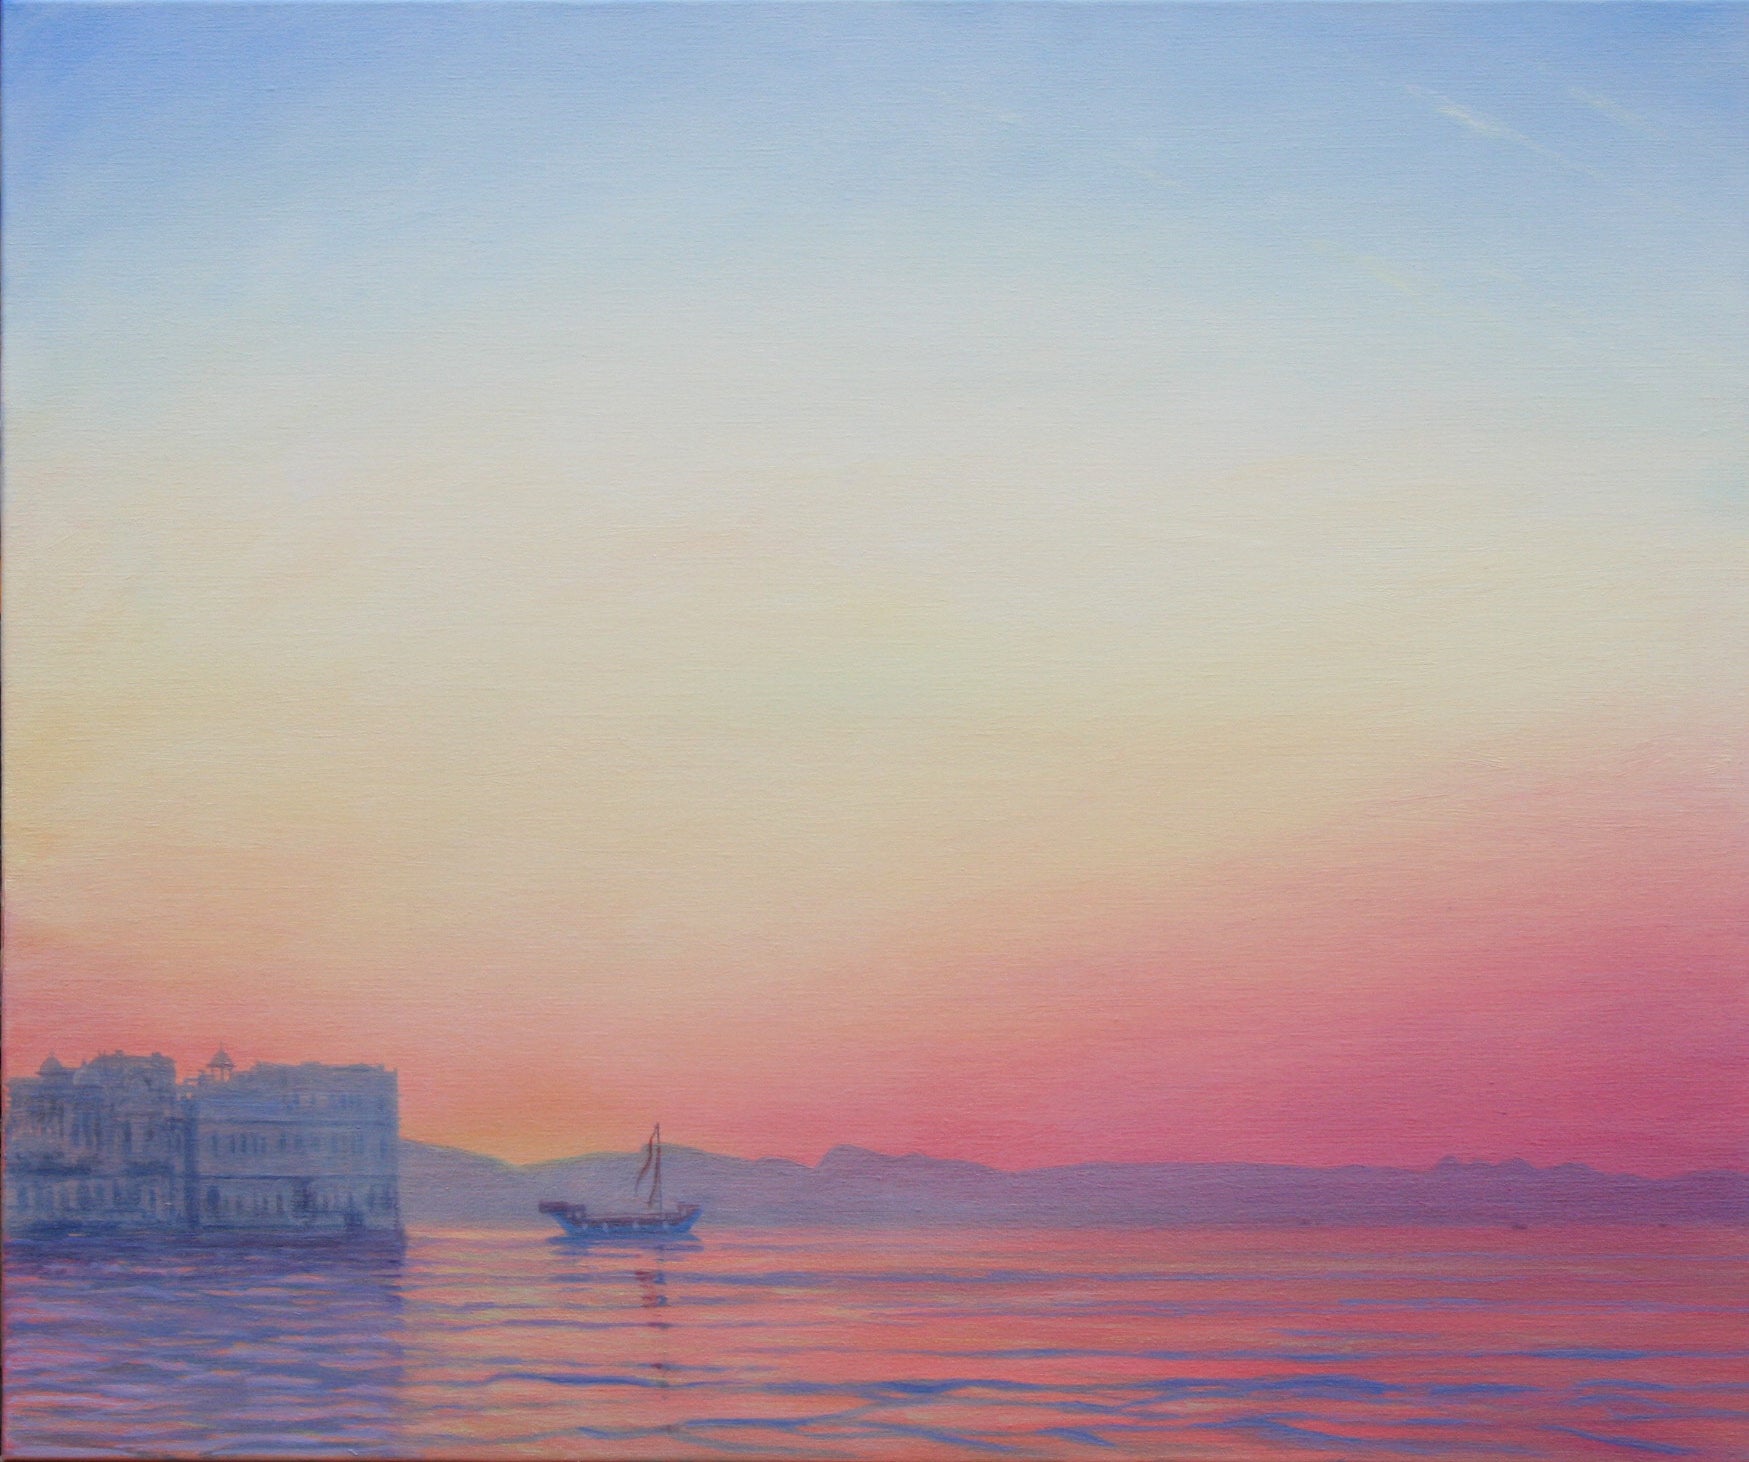 Sunset at Lake Palace, Udaipur. 36 x 30 ins. Seascape painting by Derek hare 